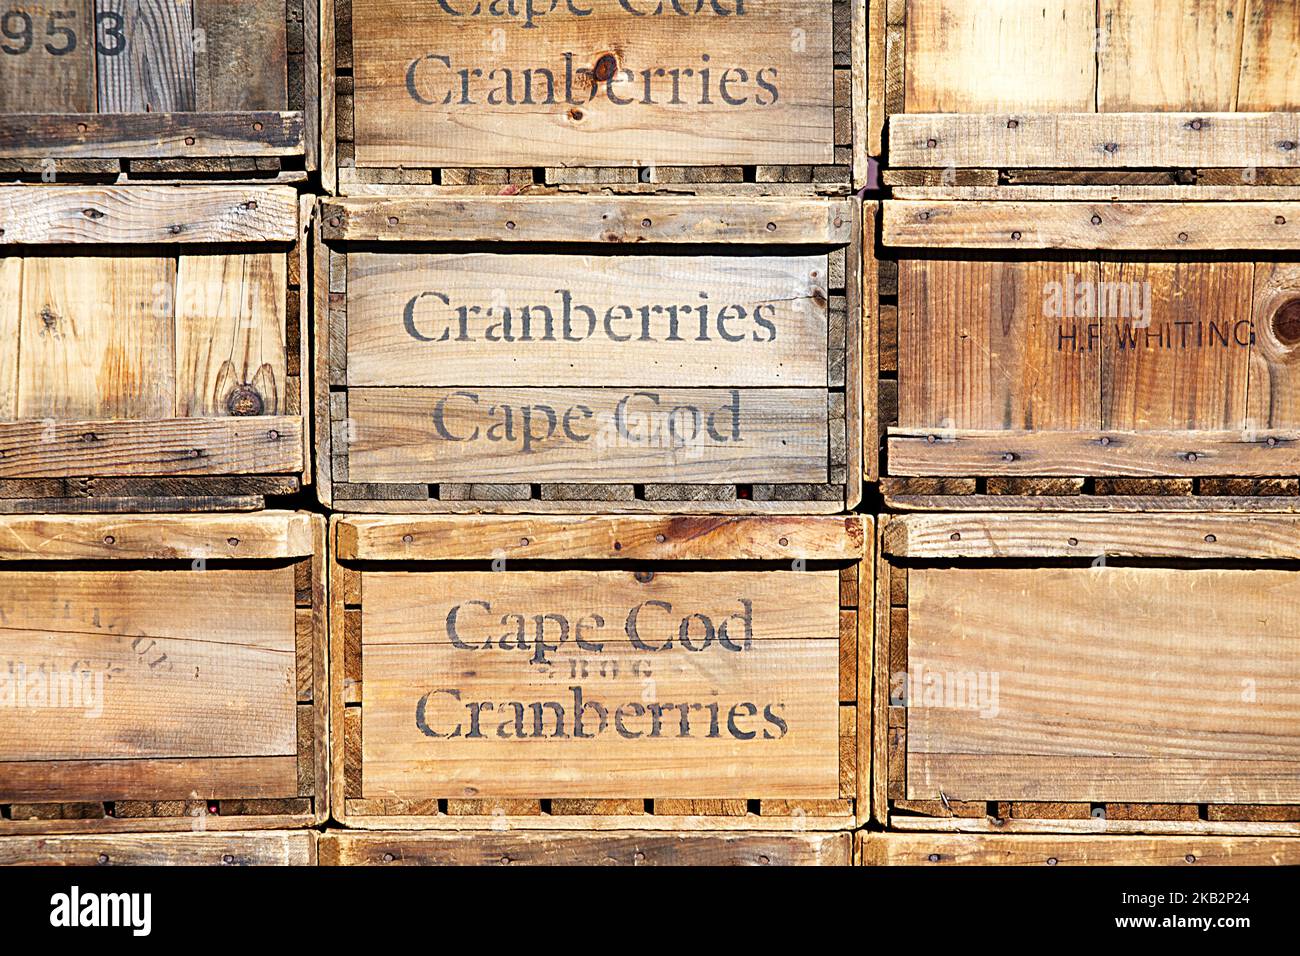 Cranberry Harvest in West Yarmouth, Massachusetts (USA) on Cape Cod. - closeup of boxes of cranberry proruct Stock Photo